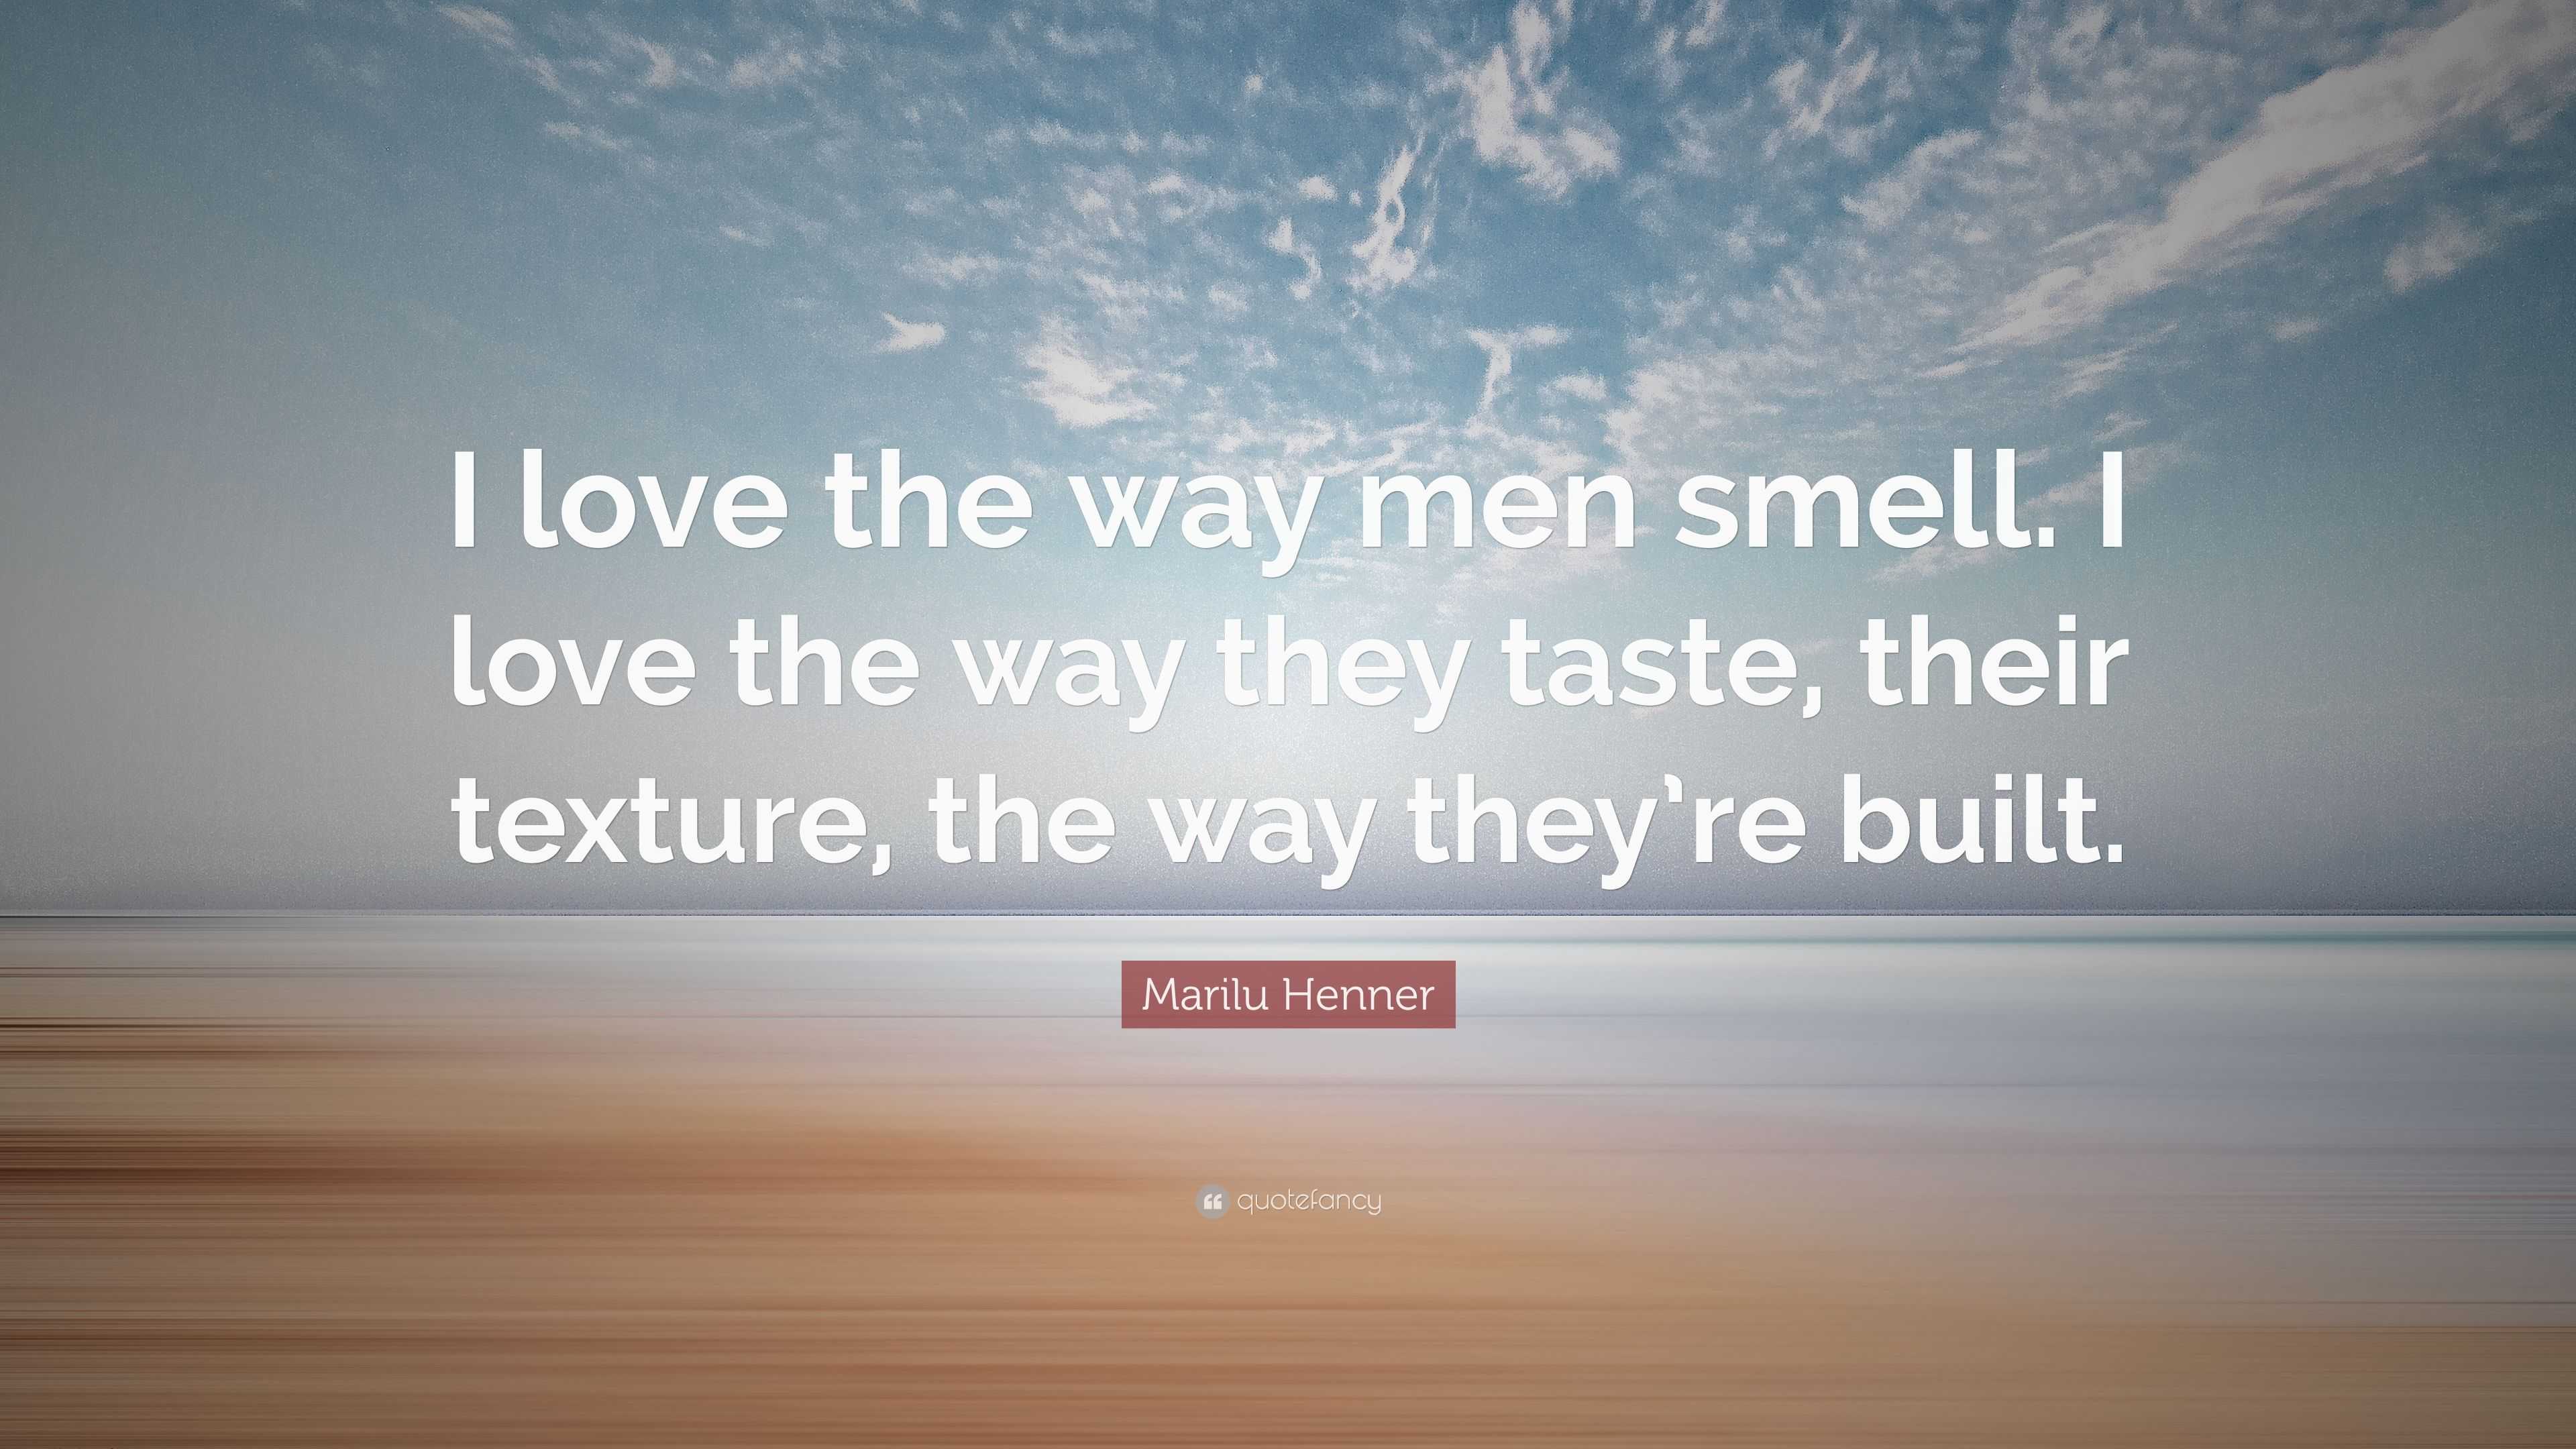 Marilu Henner Quote “I love the way men smell. I love the way they